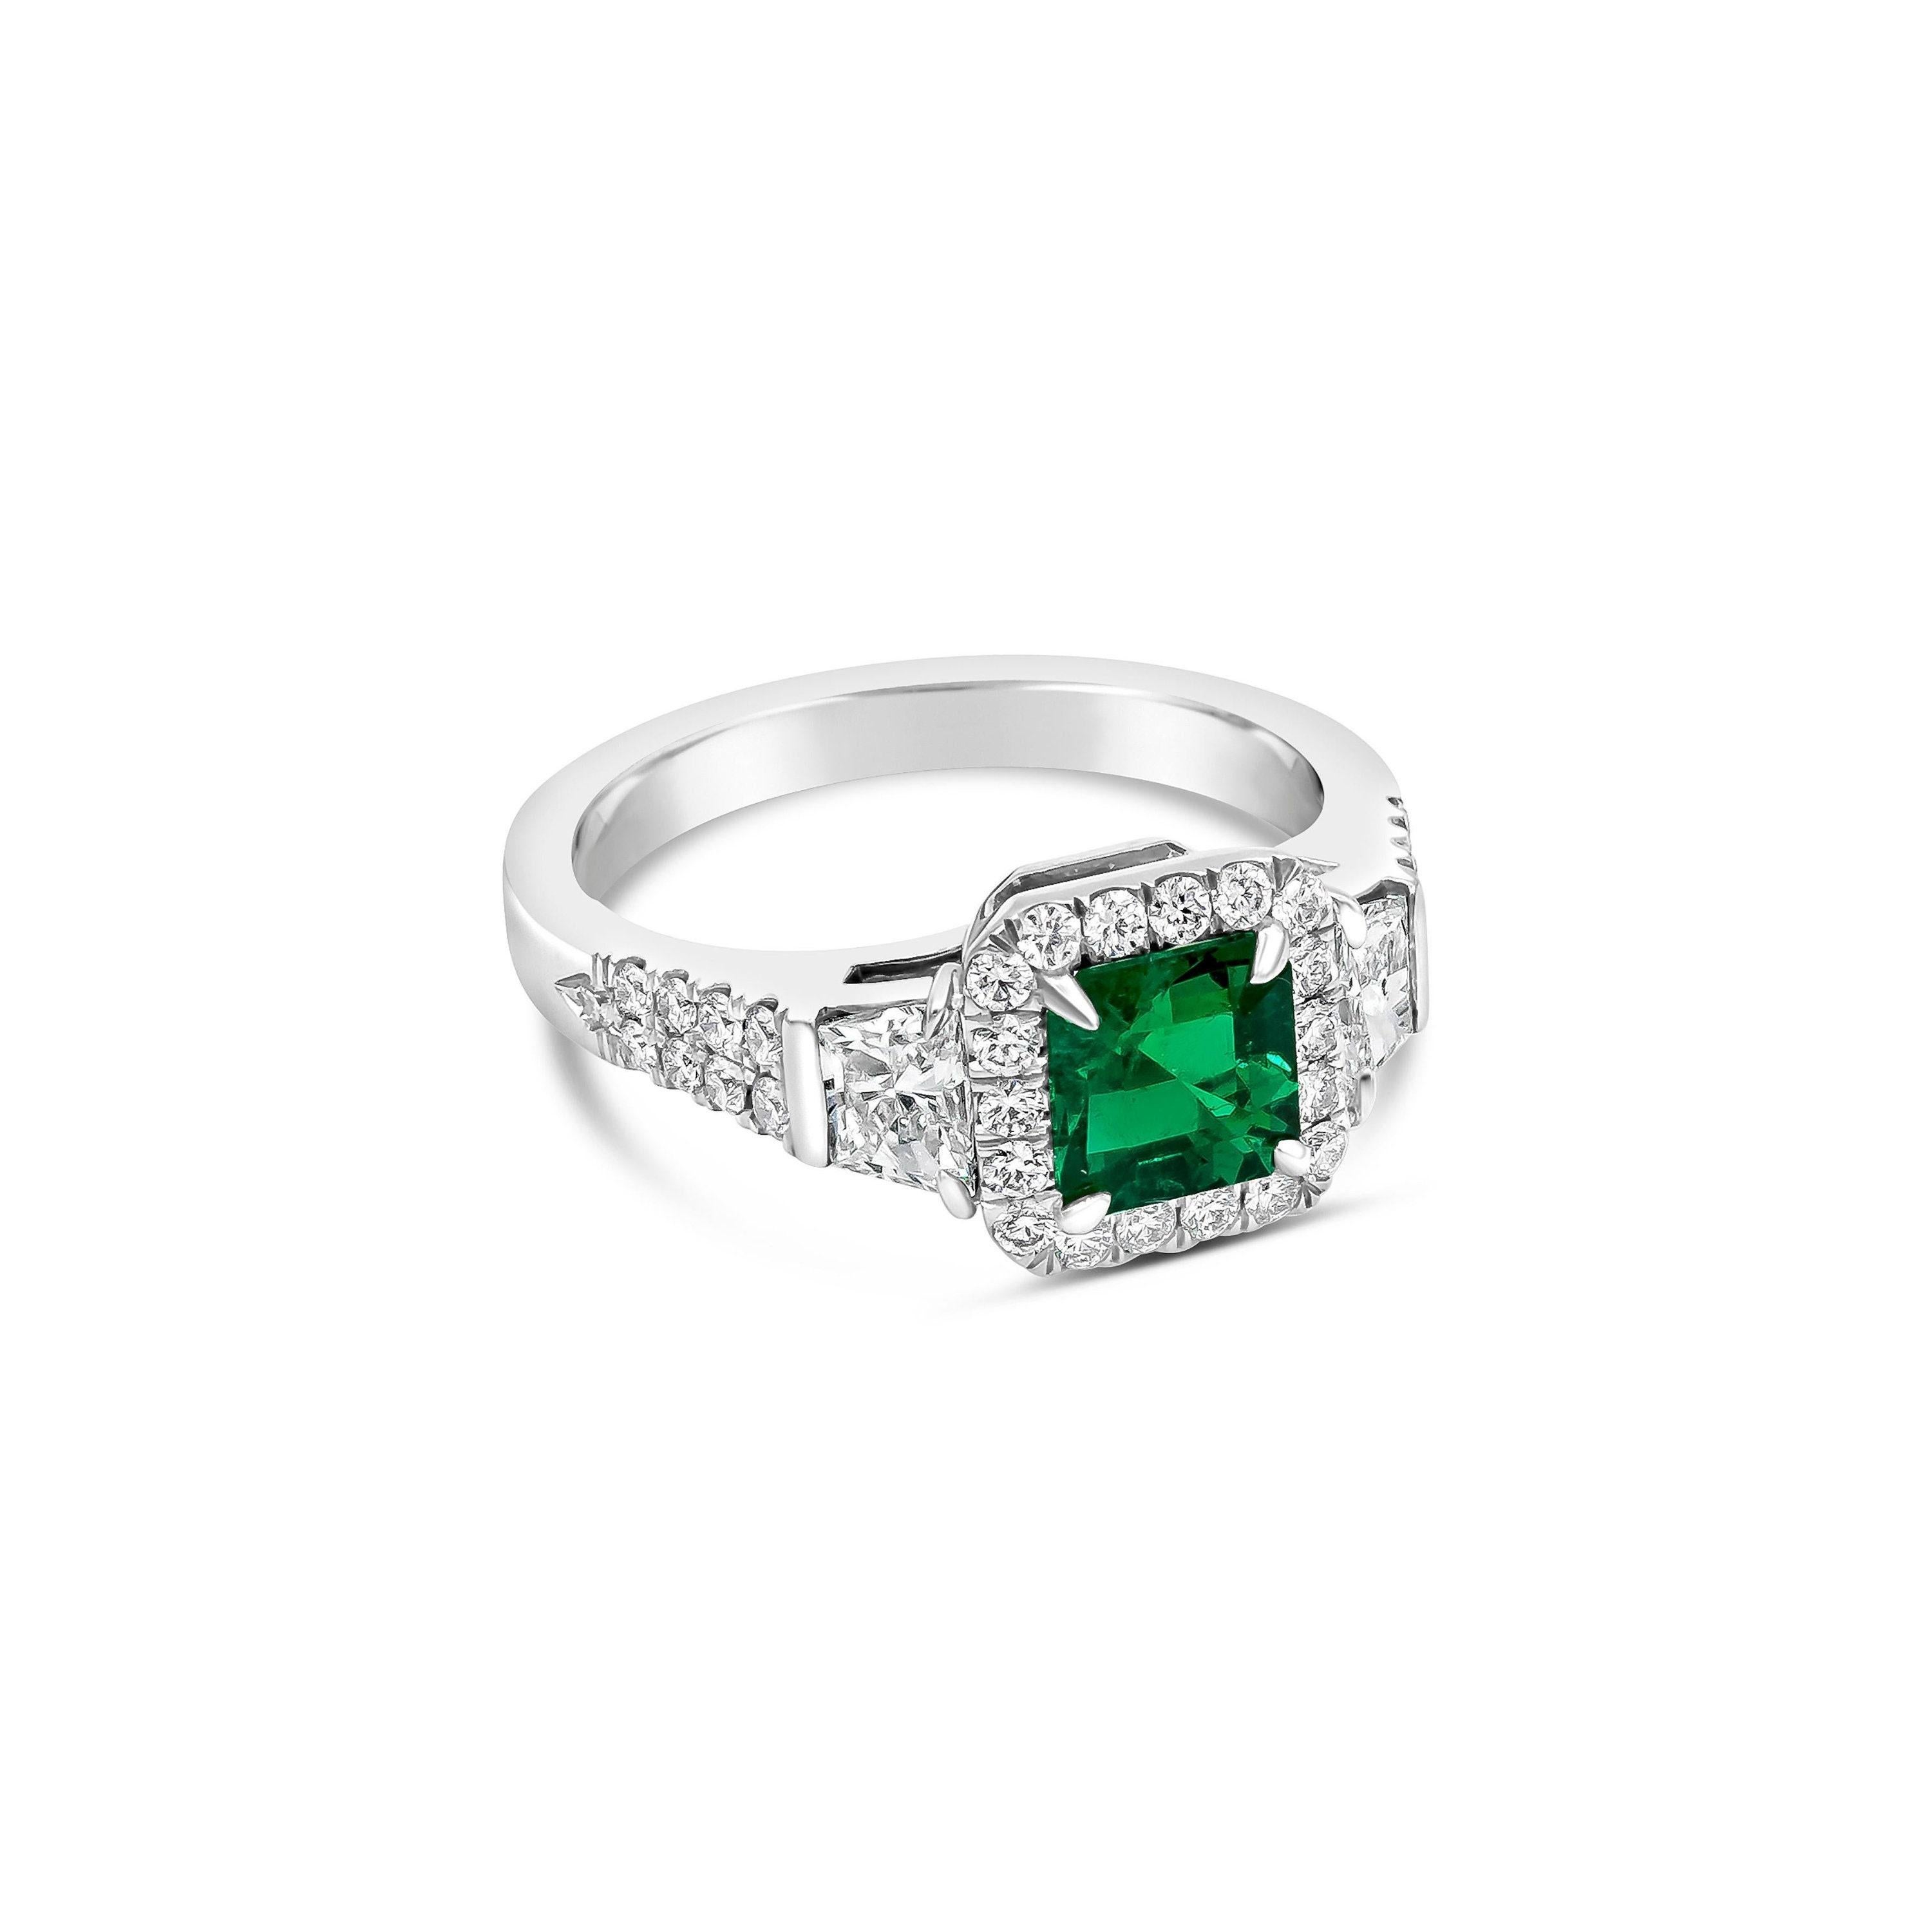 For Sale:  Emerald Cut Emerald and Diamonds Three-Stone Engagement Ring 2